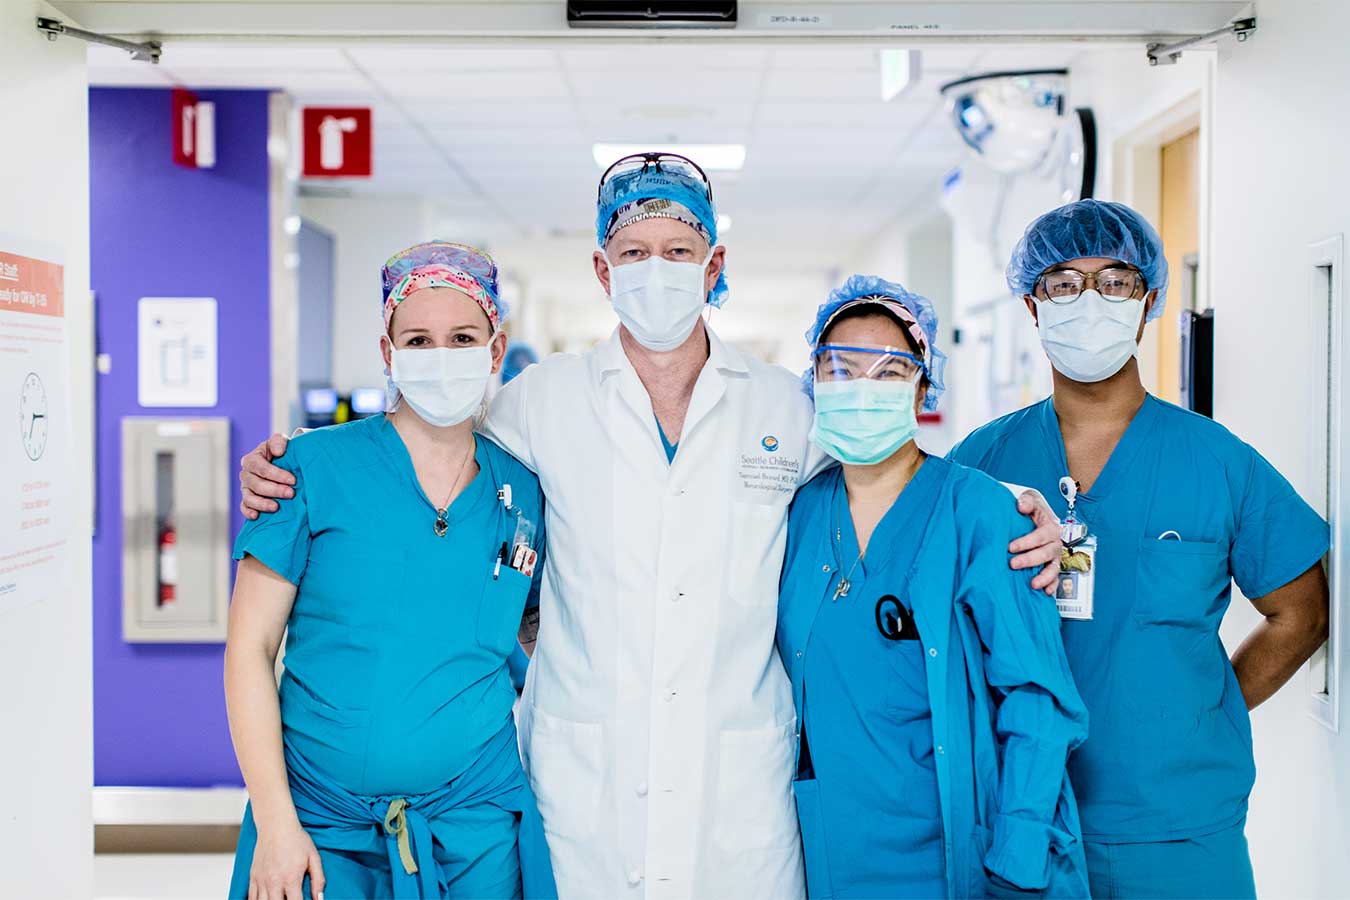 Members of the Seattle Children's Neurosurgery team pose together in scrubs and masks